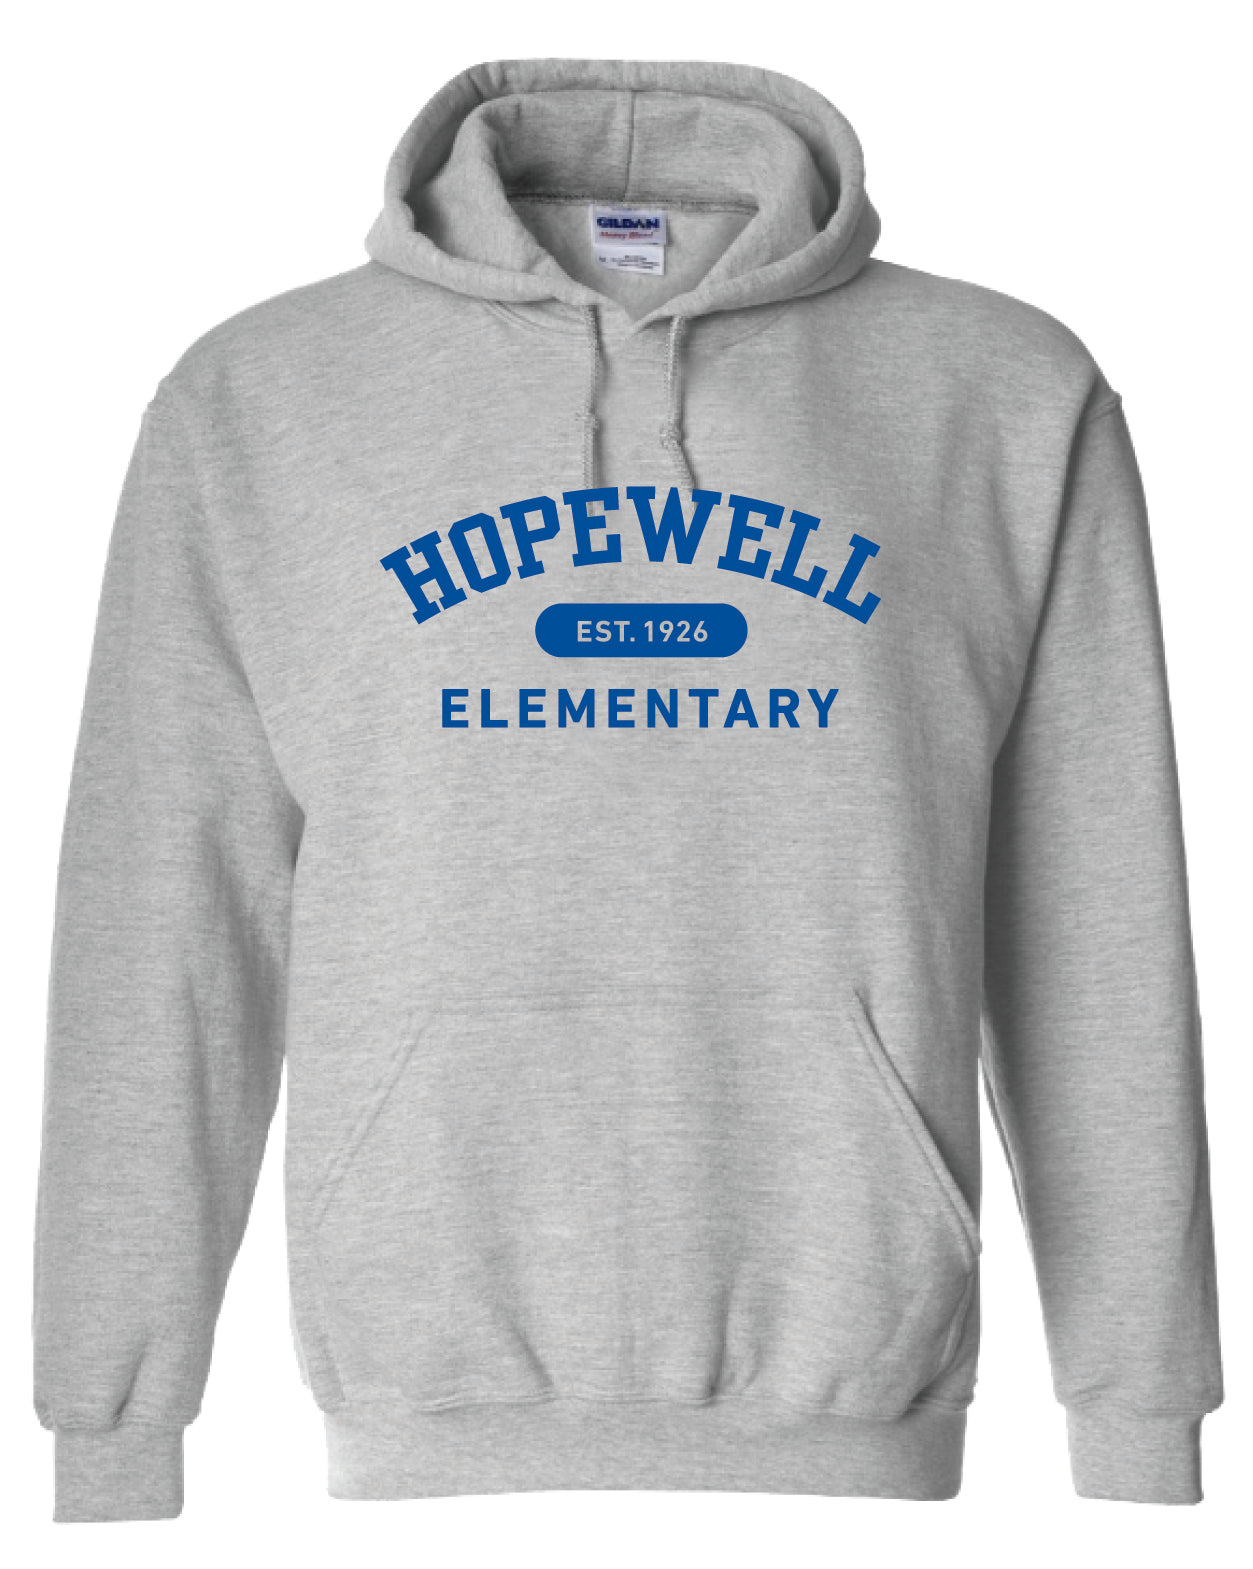 Hopewell Elementary Gray Hoodie - Adult and Youth